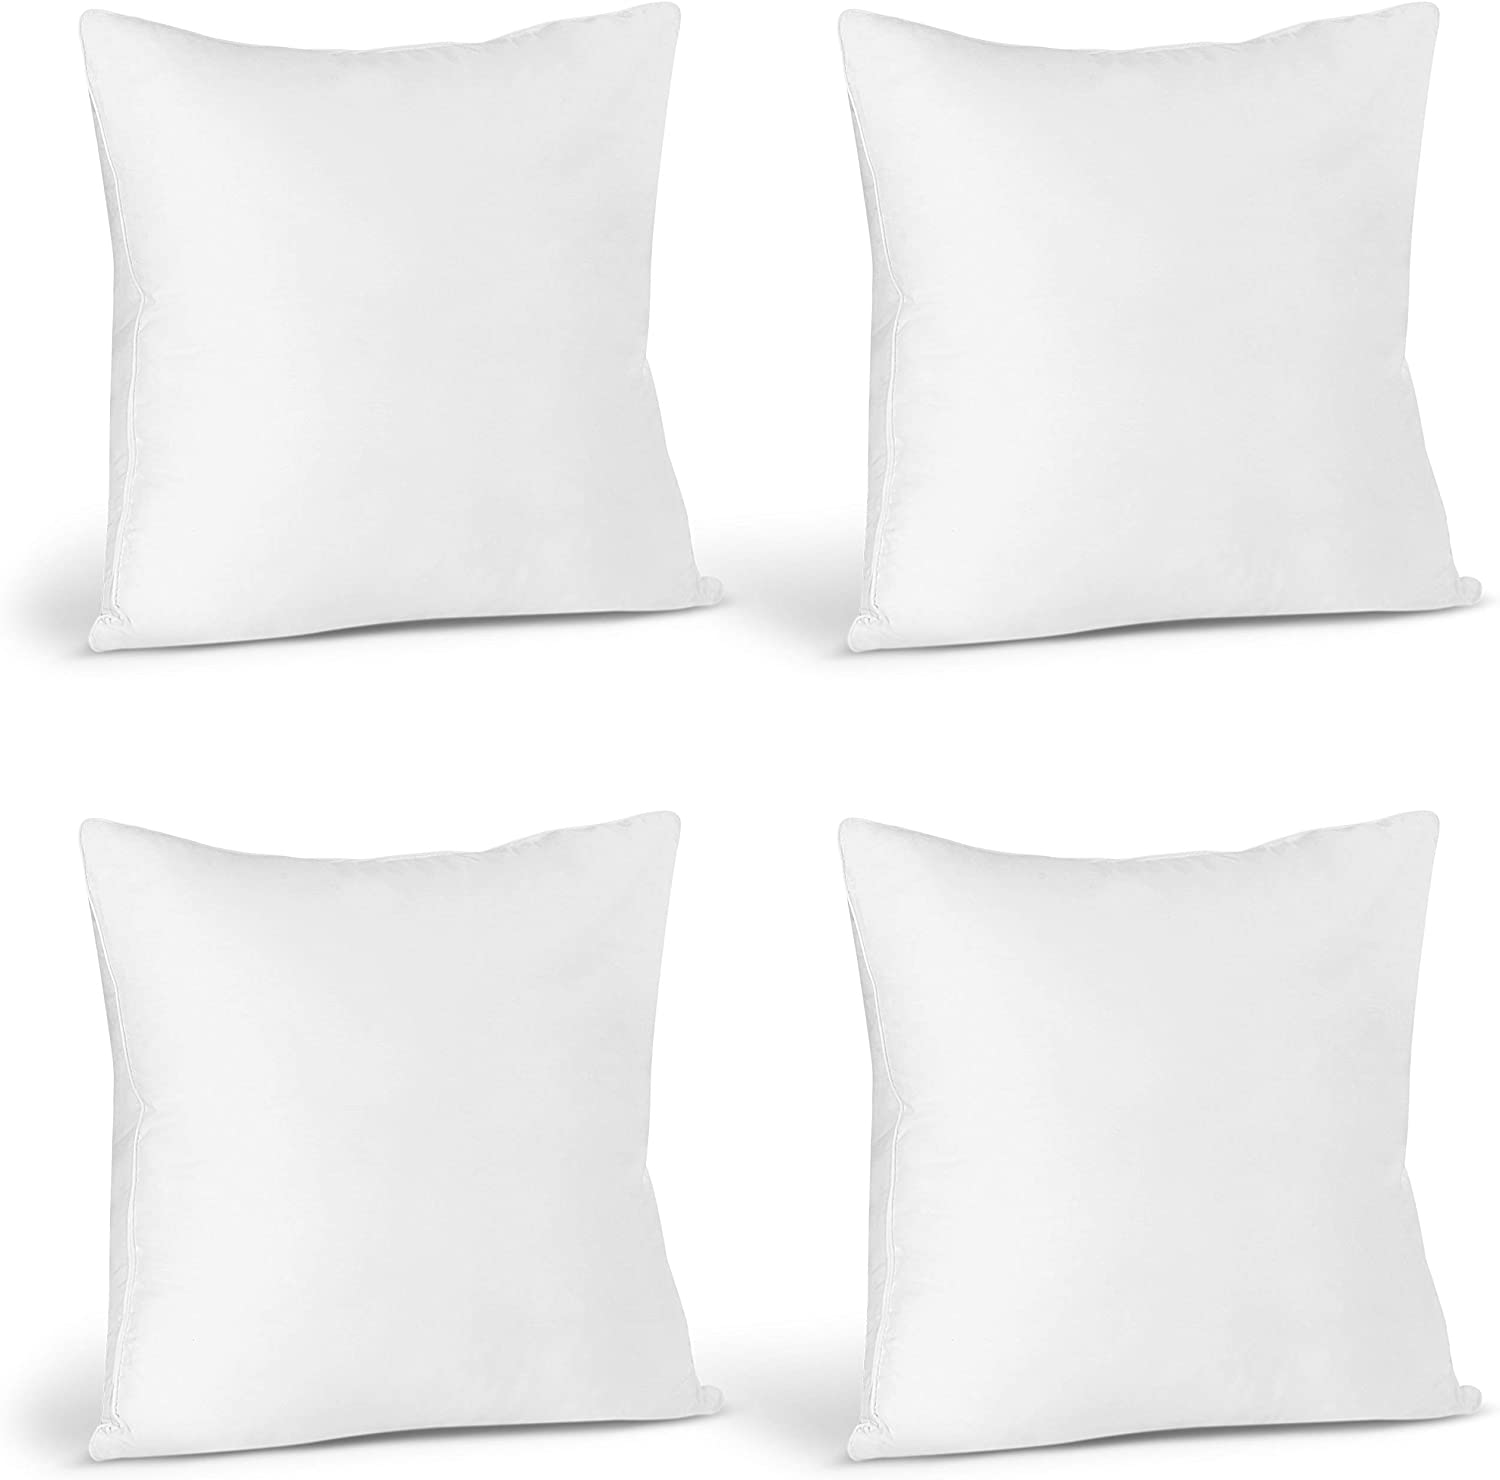 Utopia Bedding Throw Bed and Couch Pillows Insert 20 x 20 Inches for Home Bedroom Pack of 2